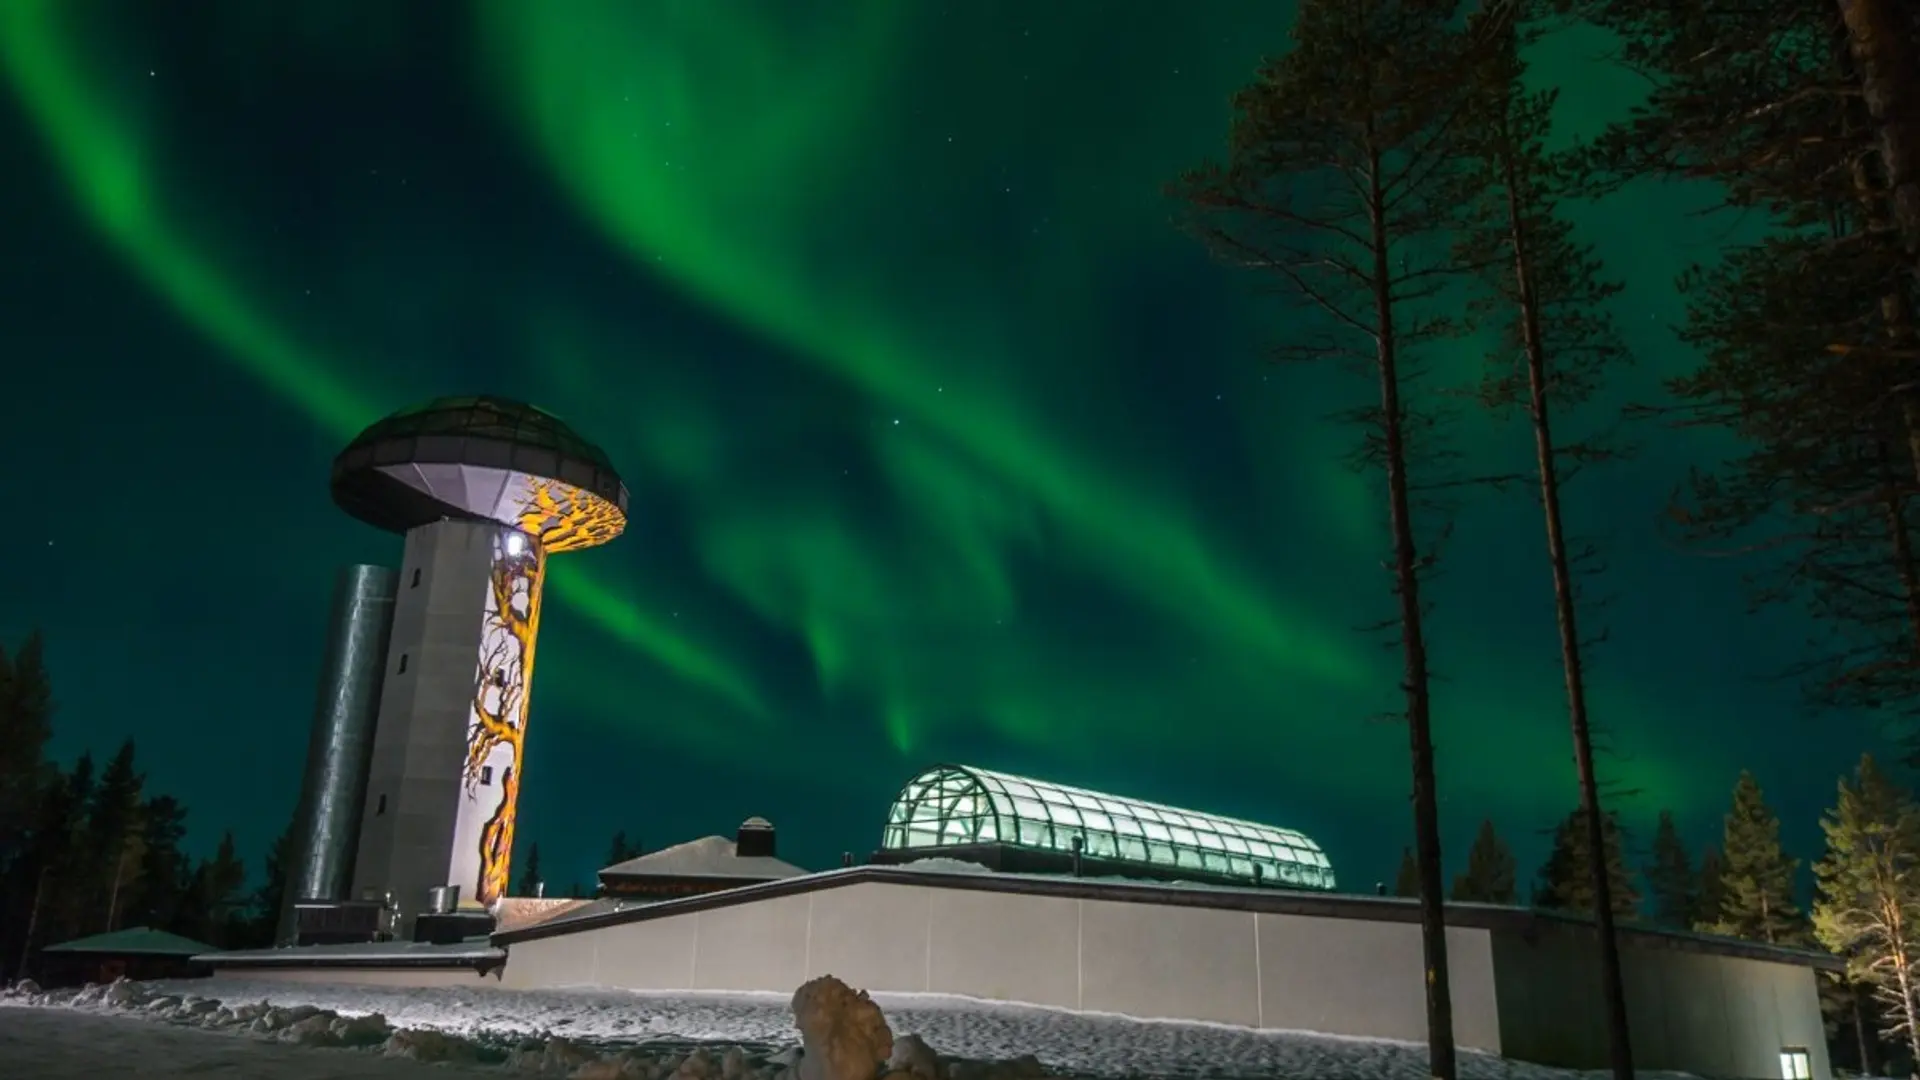 Hotel review Service & Facilities' - Kakslauttanen Arctic Resort - Igloos and Chalets - 19